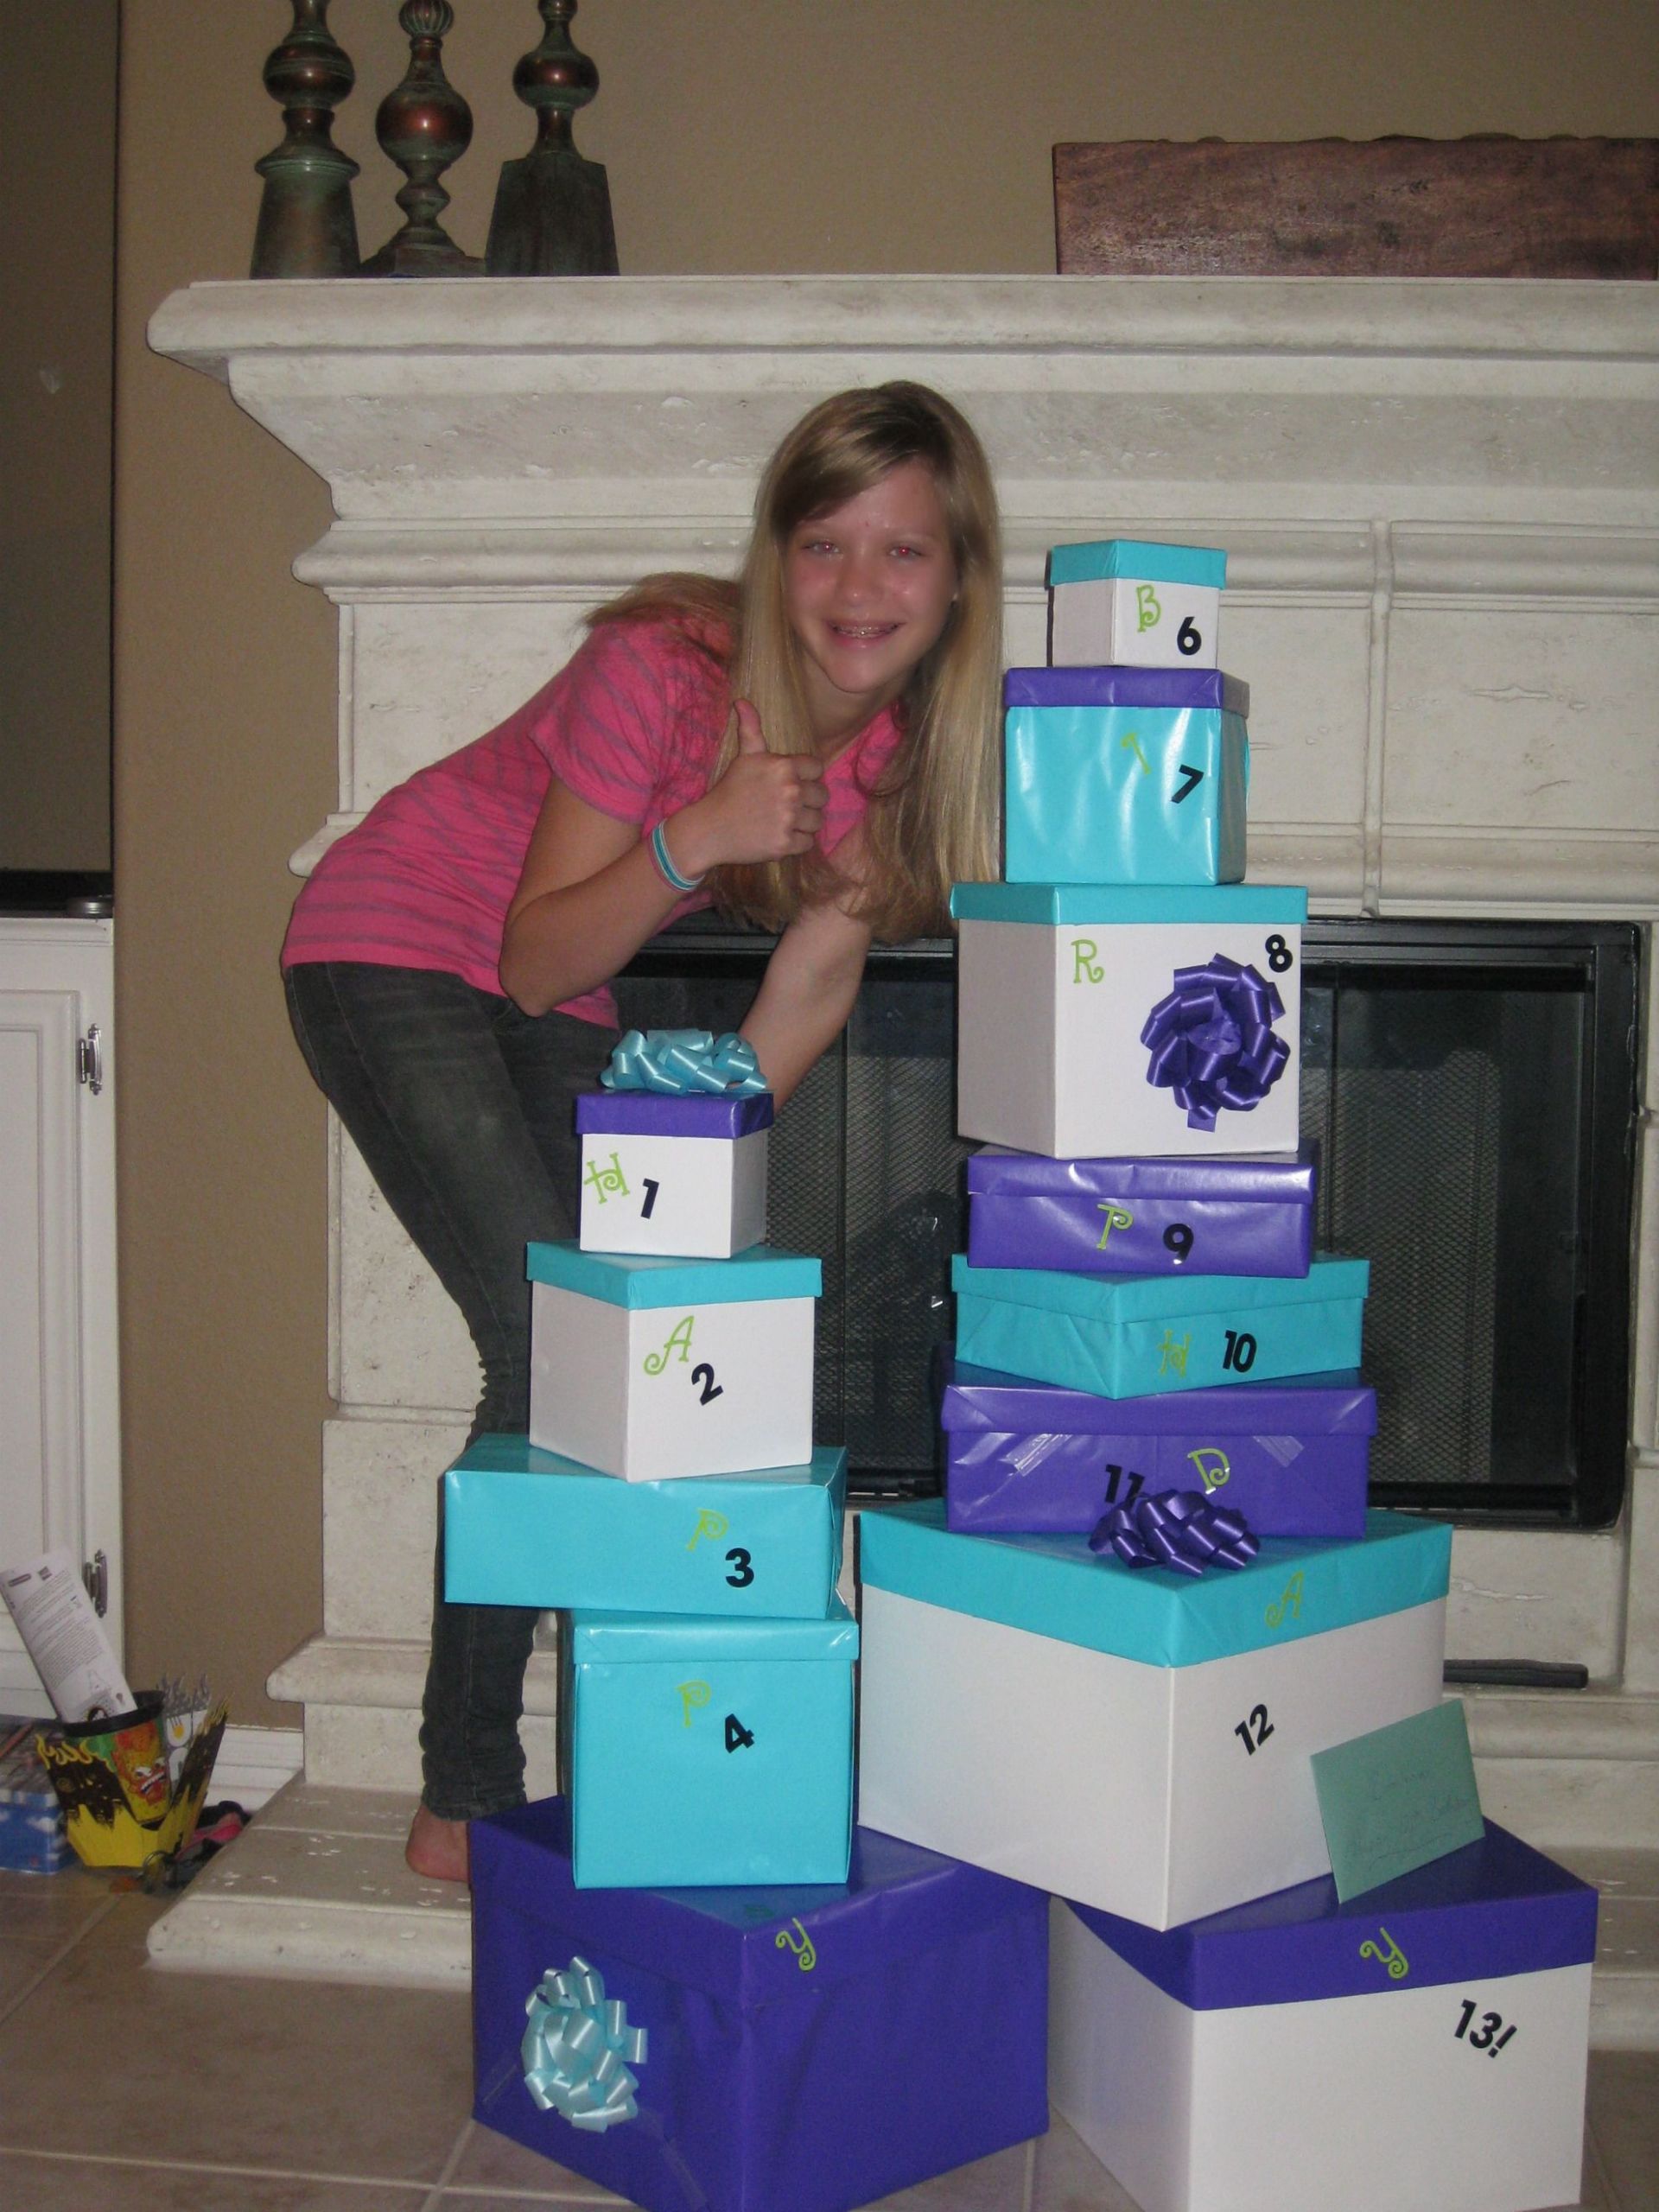 13th Girl Birthday Party Ideas
 Top 20 13th Birthday Gift Ideas for Girl Home Family